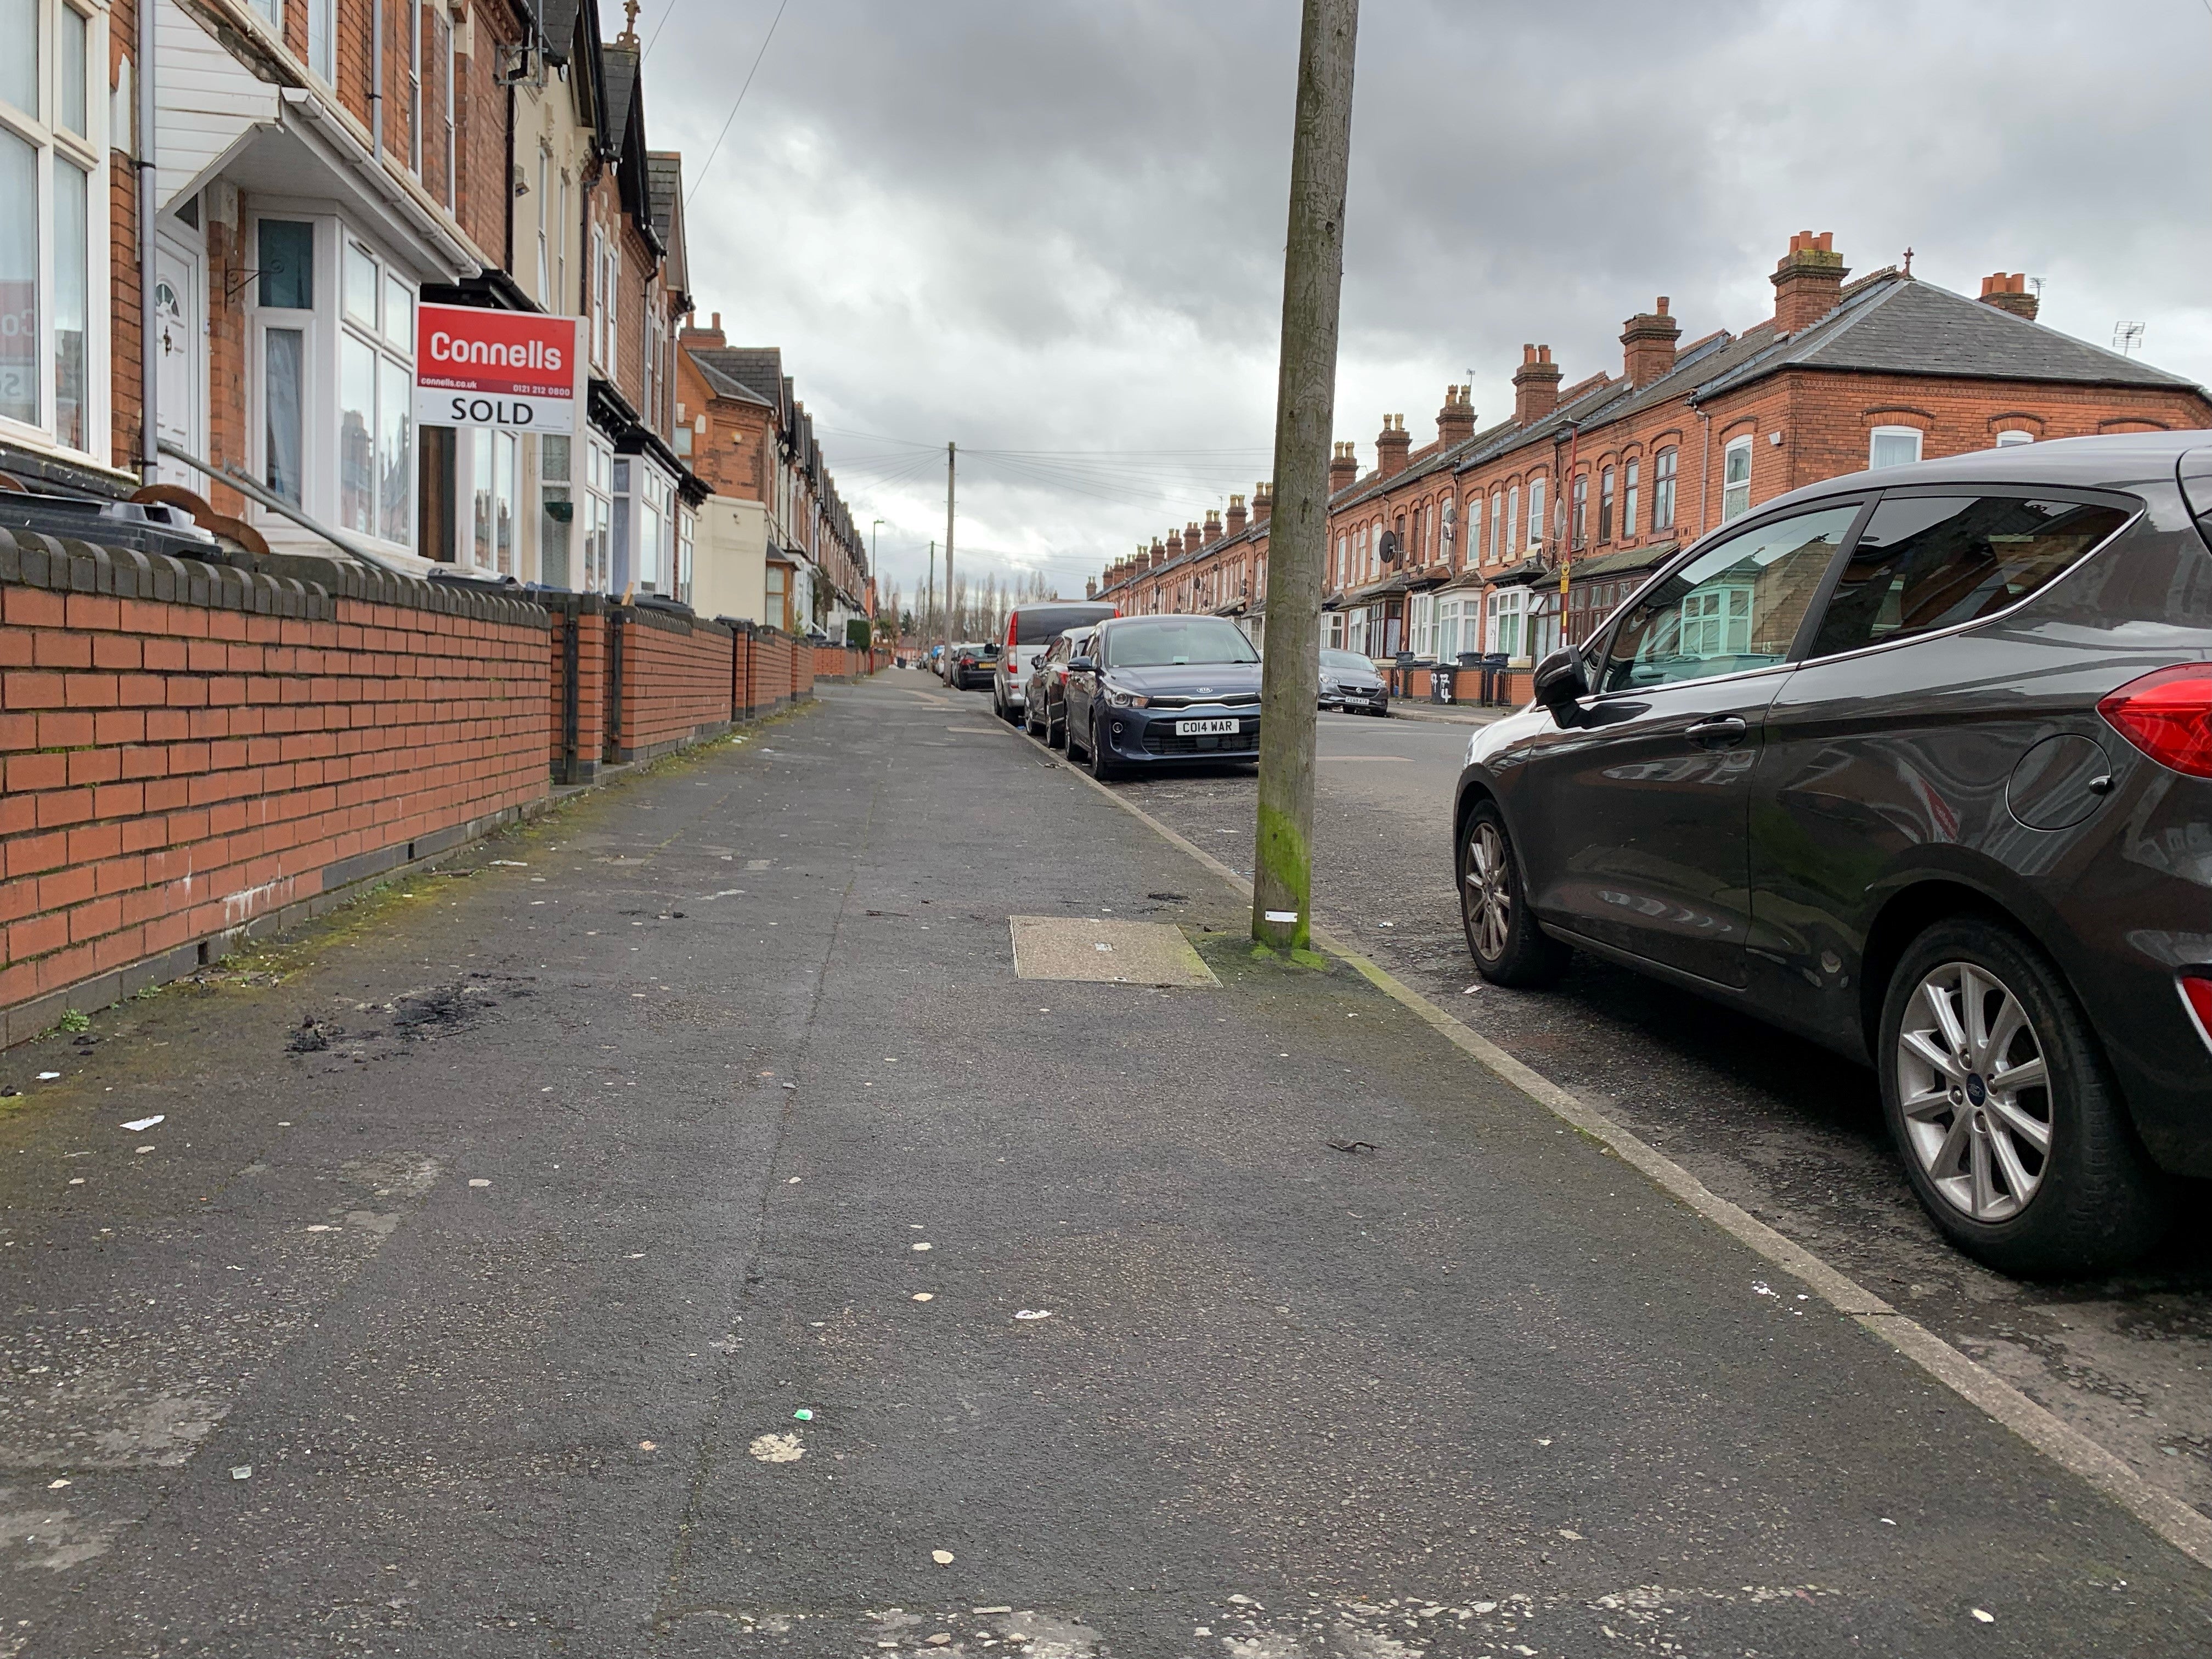 Brixham Road in Edgbaston, Birmingham, where a man suffered facial burns after his jacket was set alight as he walked home from a mosque on Monday evening